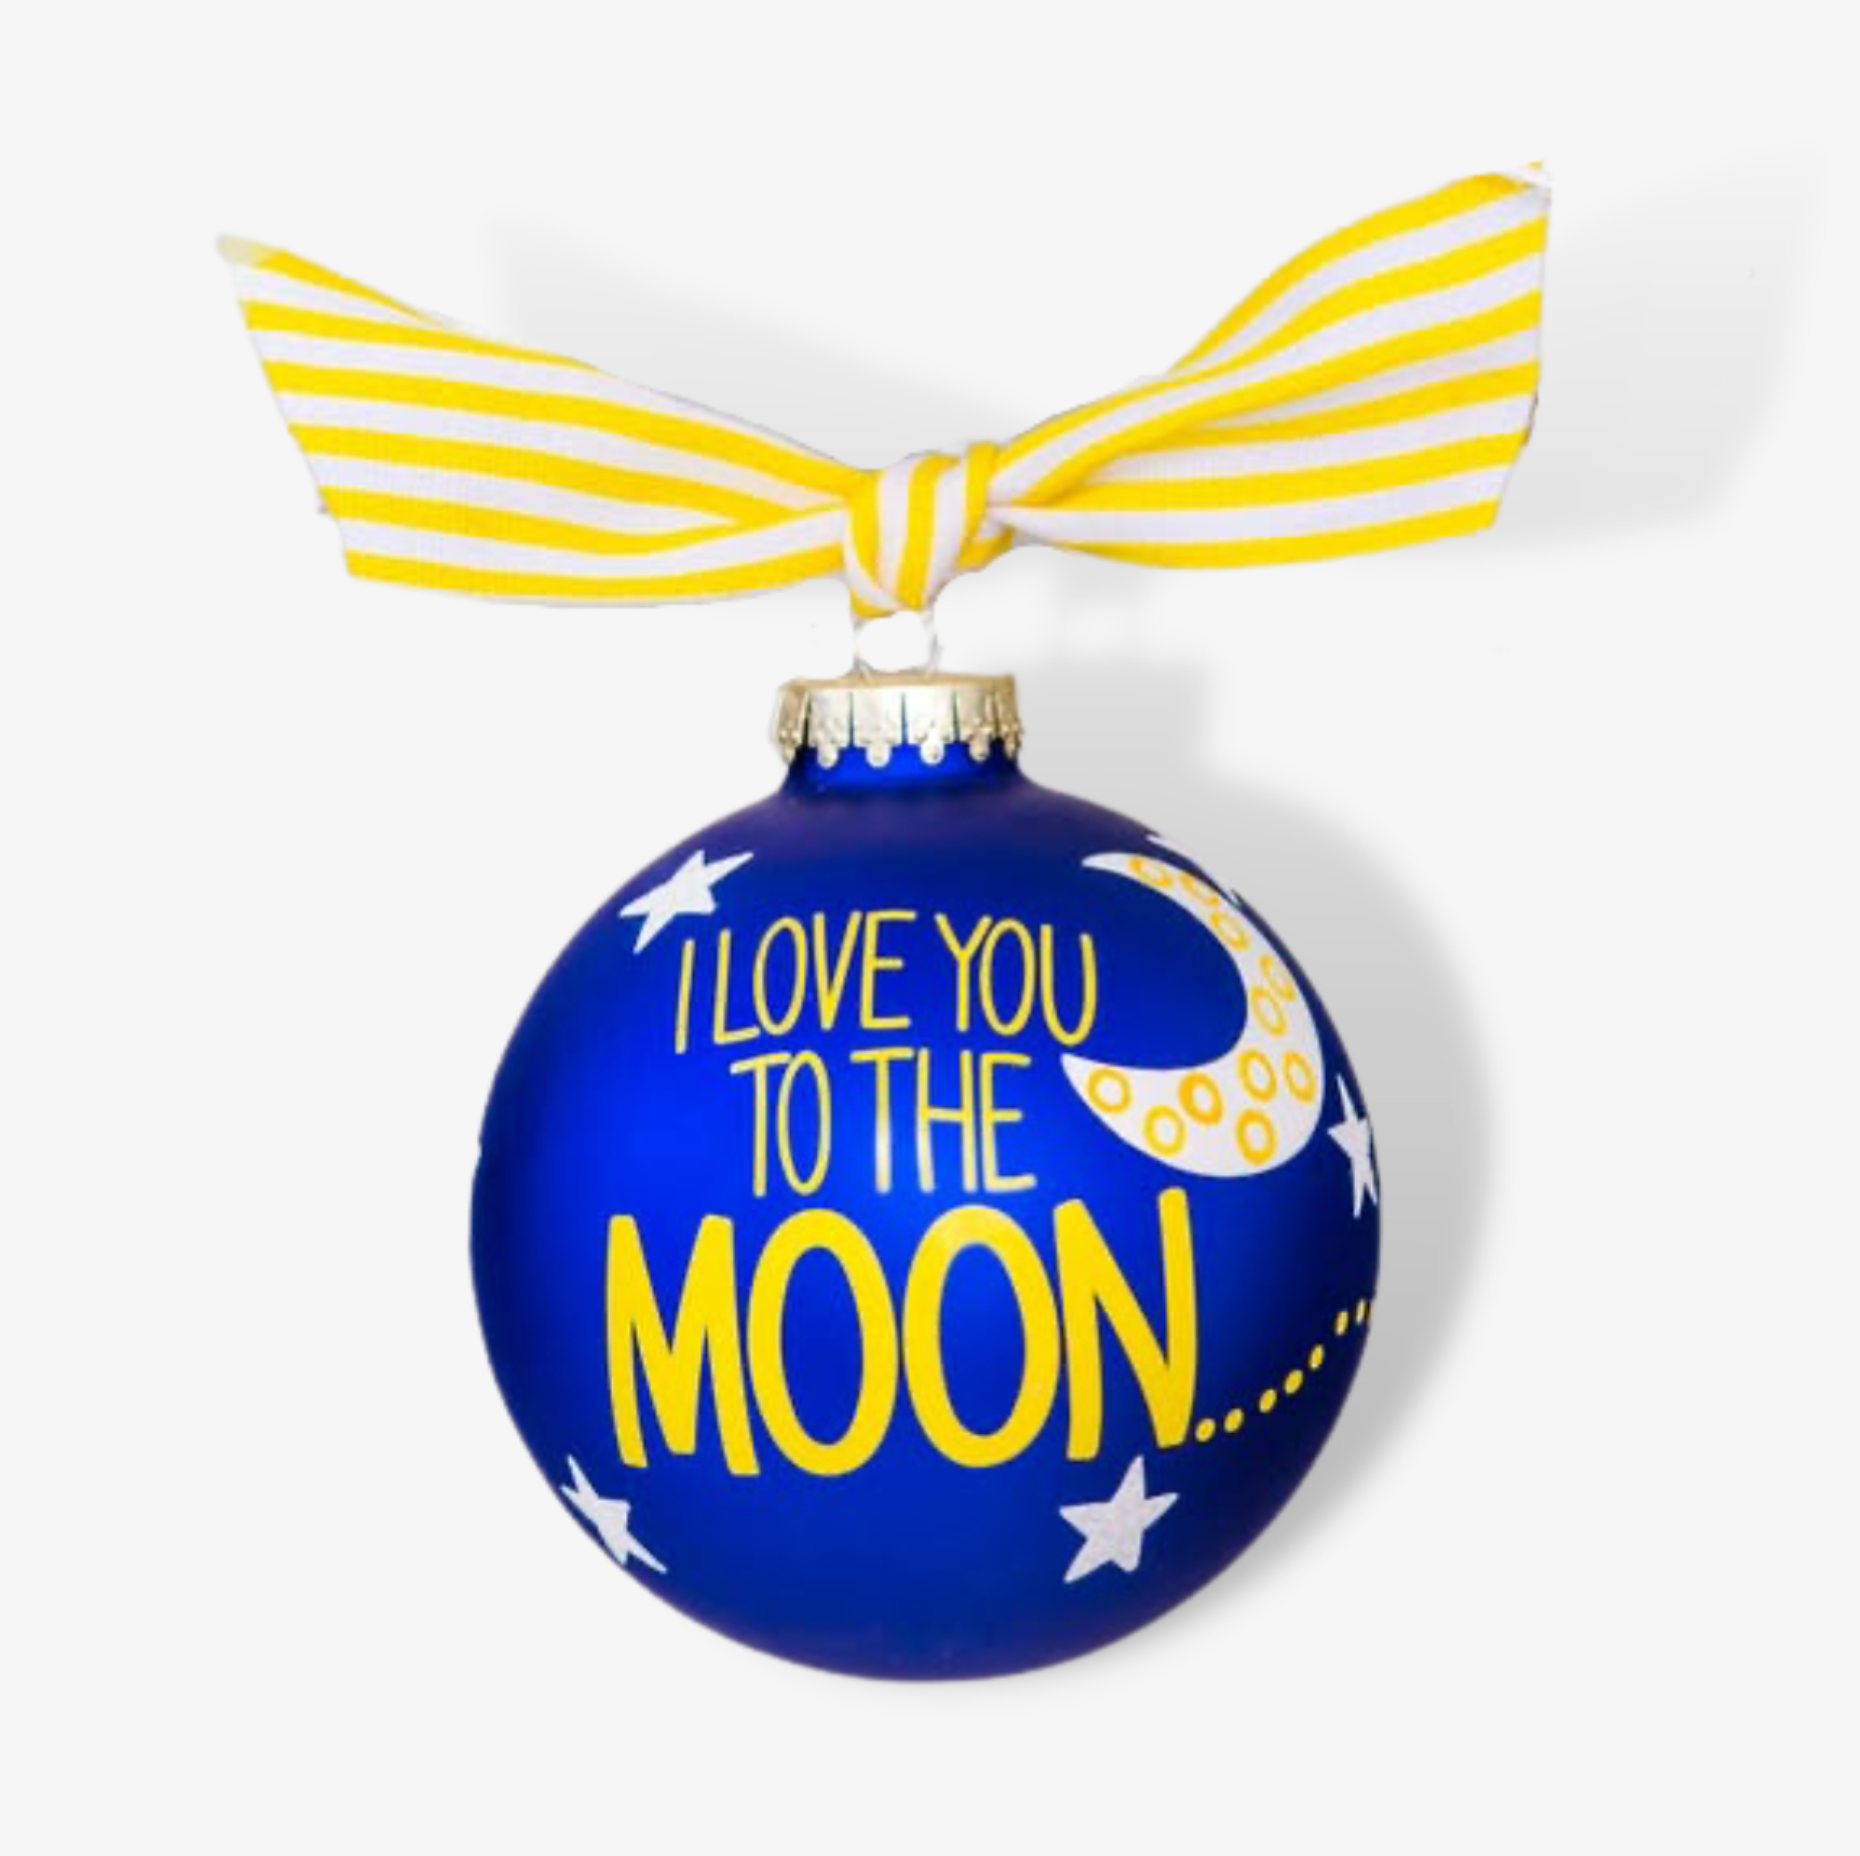 Giant 'Love You To The Moon' Bauble